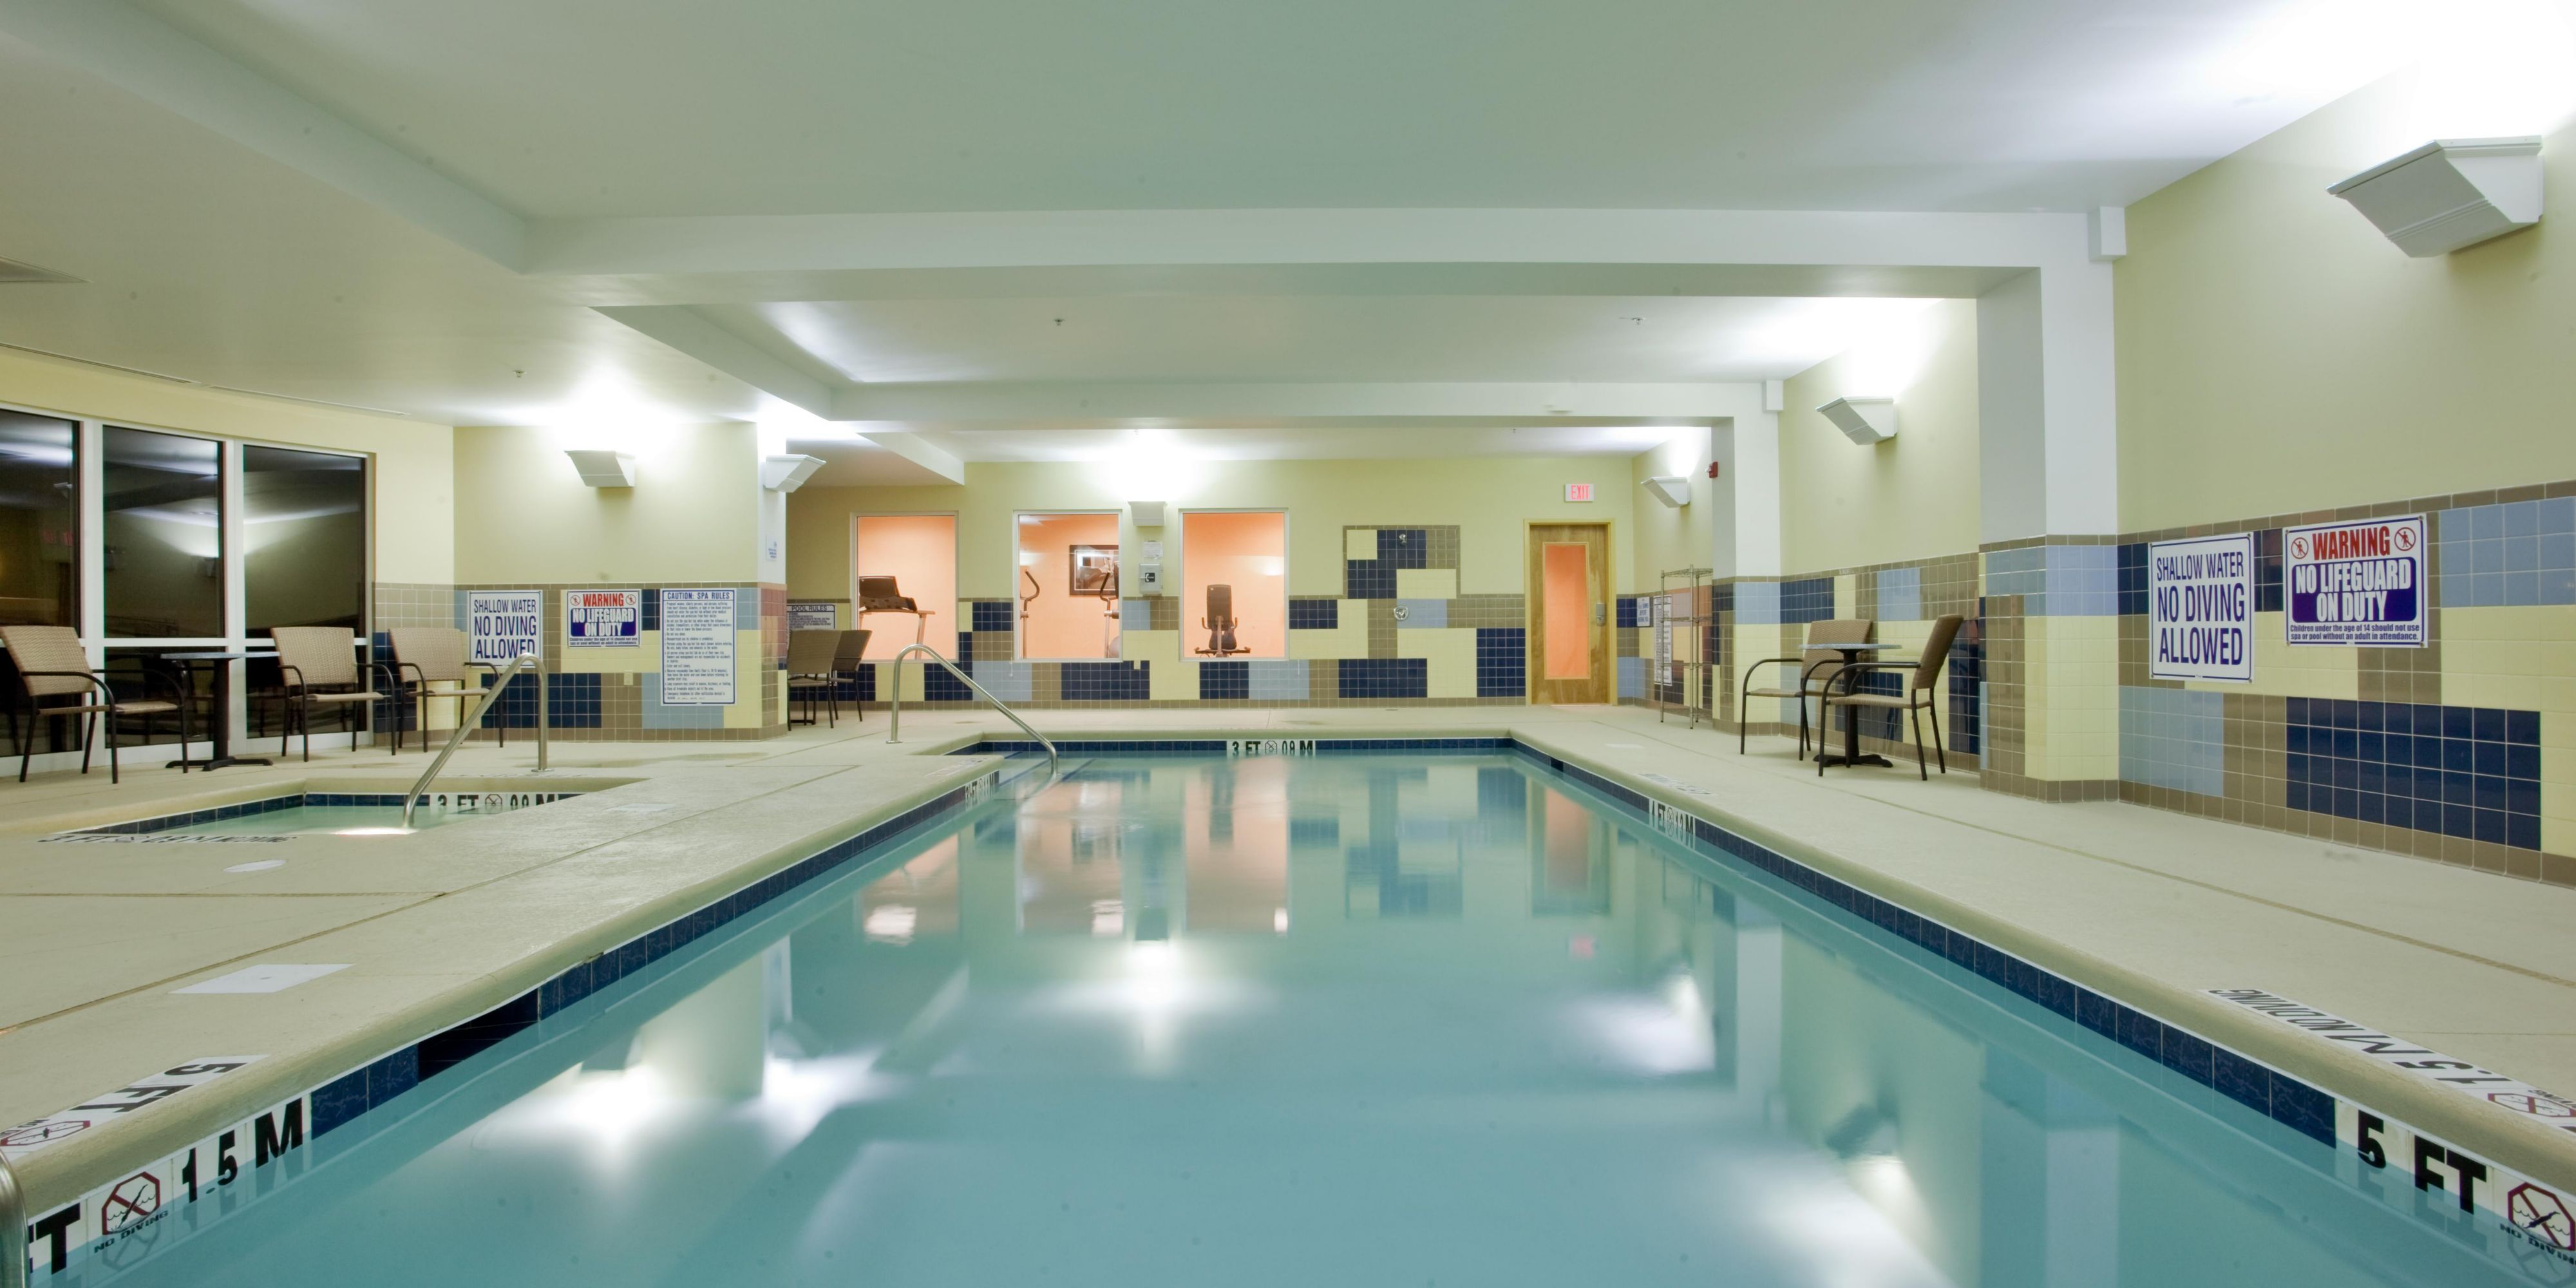 Come and enjoy our indoor heated pool. After a long day of travel or training take a dip in our relaxing indoor heated pool.